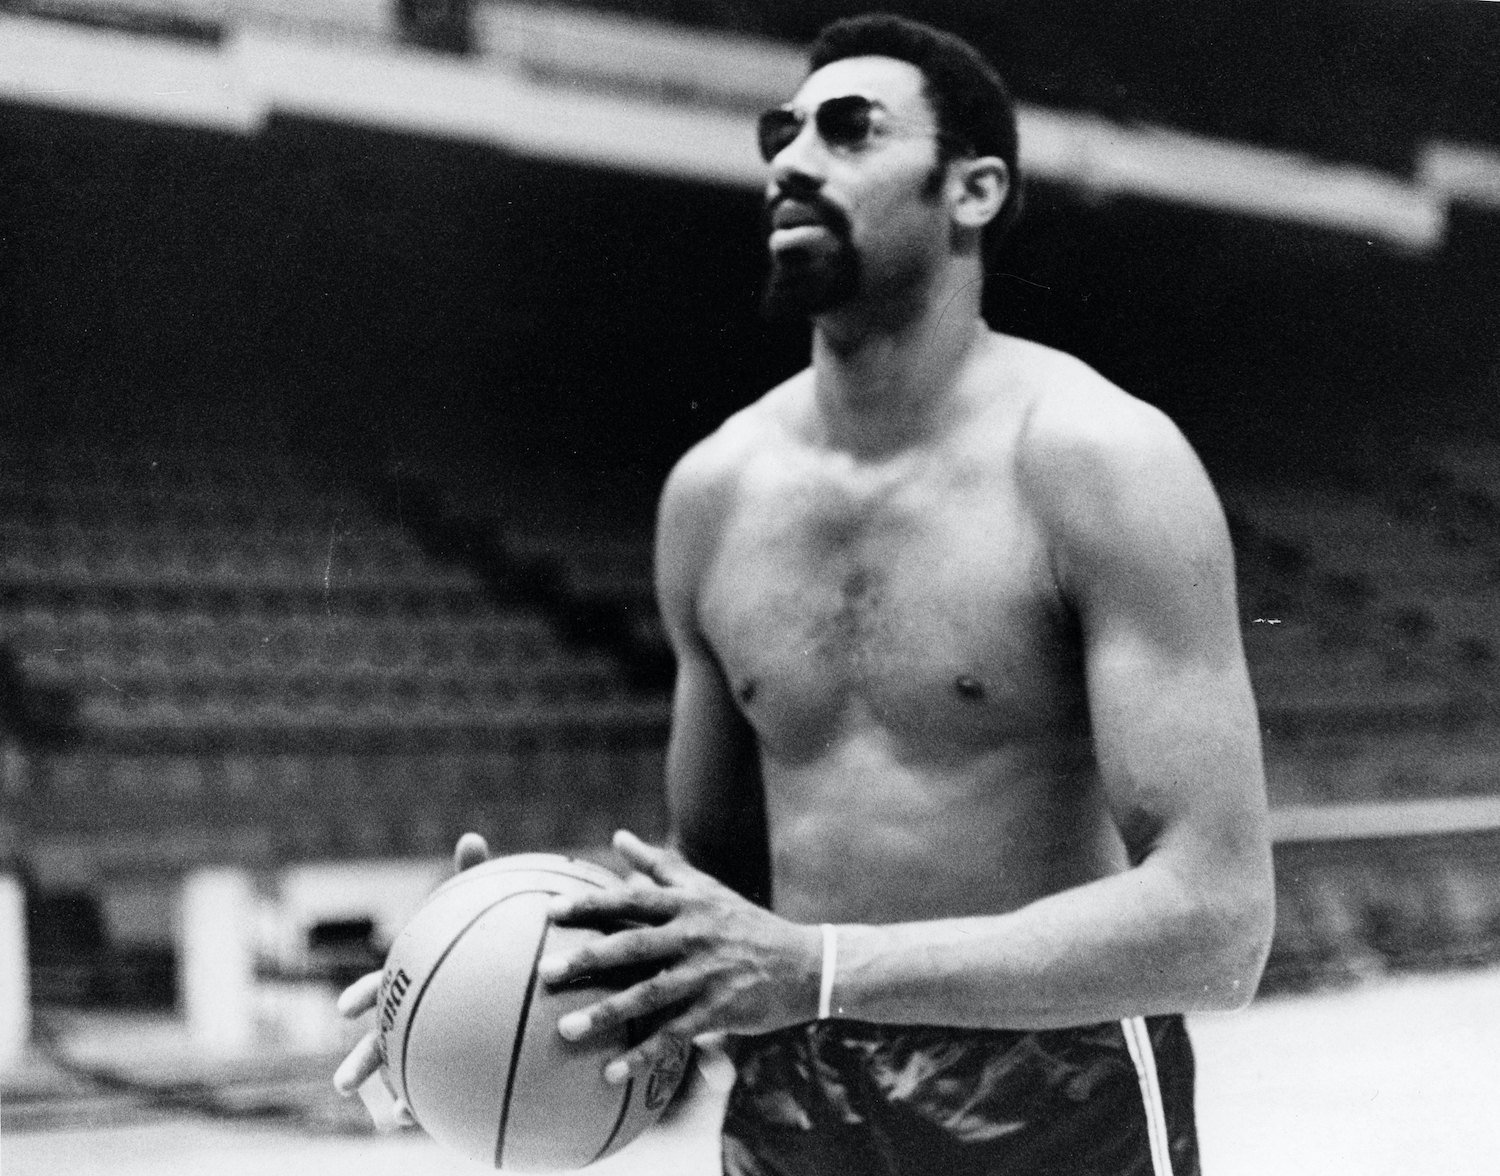 A shirtless Wilt Chamberlain on the court ahead of a game against the Boston Celtics.